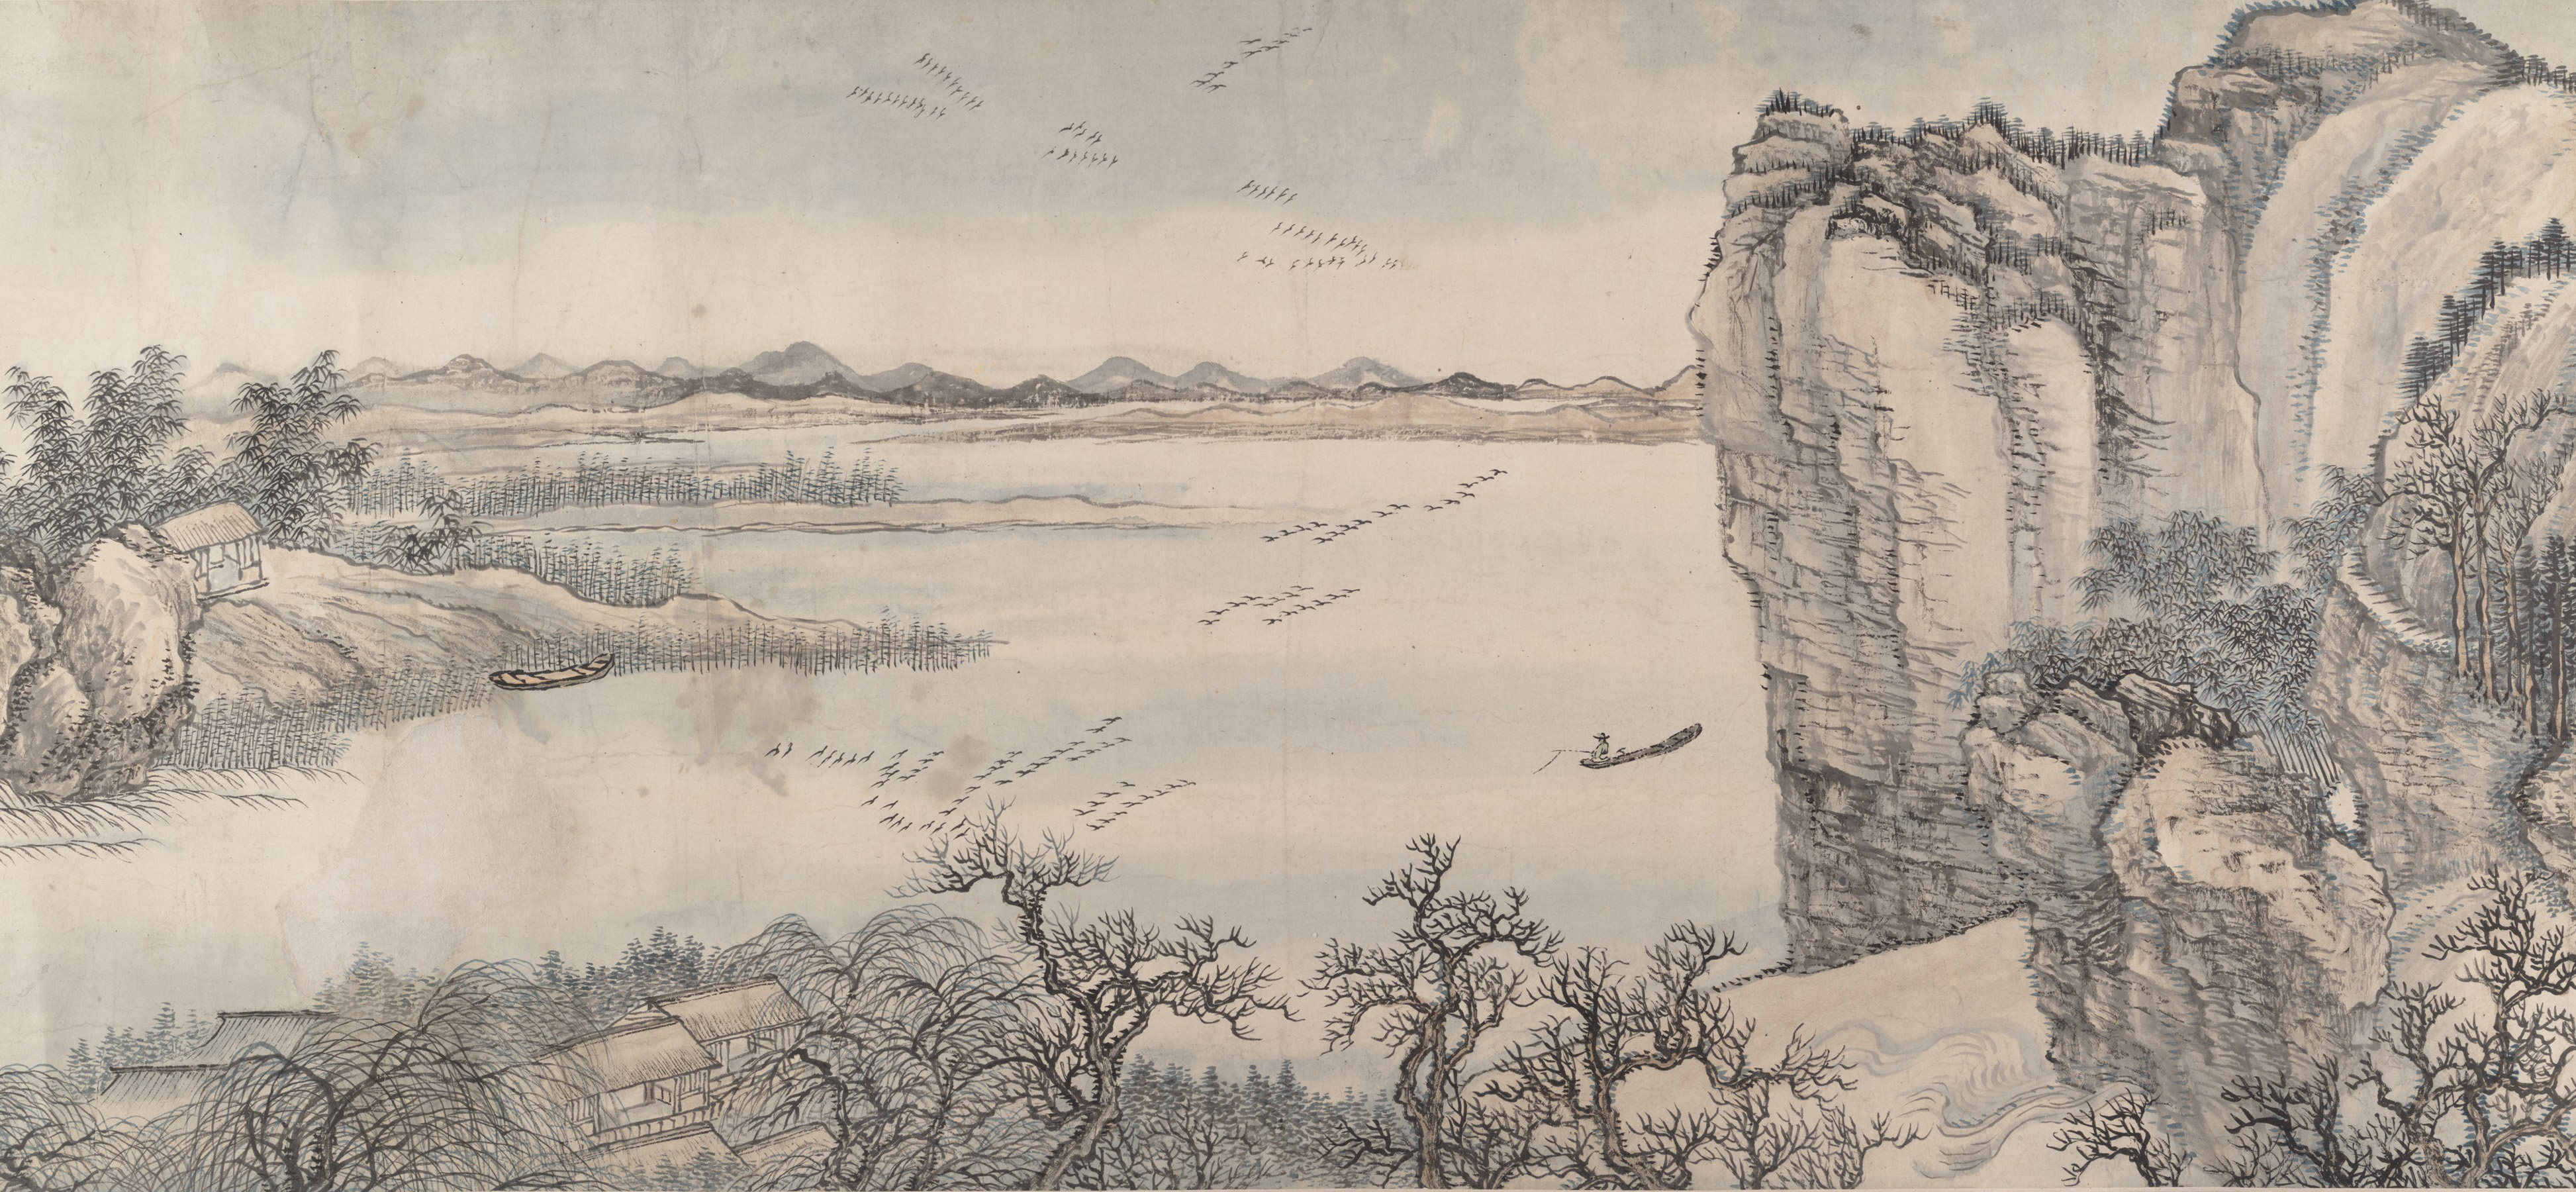 A drawing from the Metropolitan Museum of Art featuring a landscape full of cliffs, trees, and a lake.